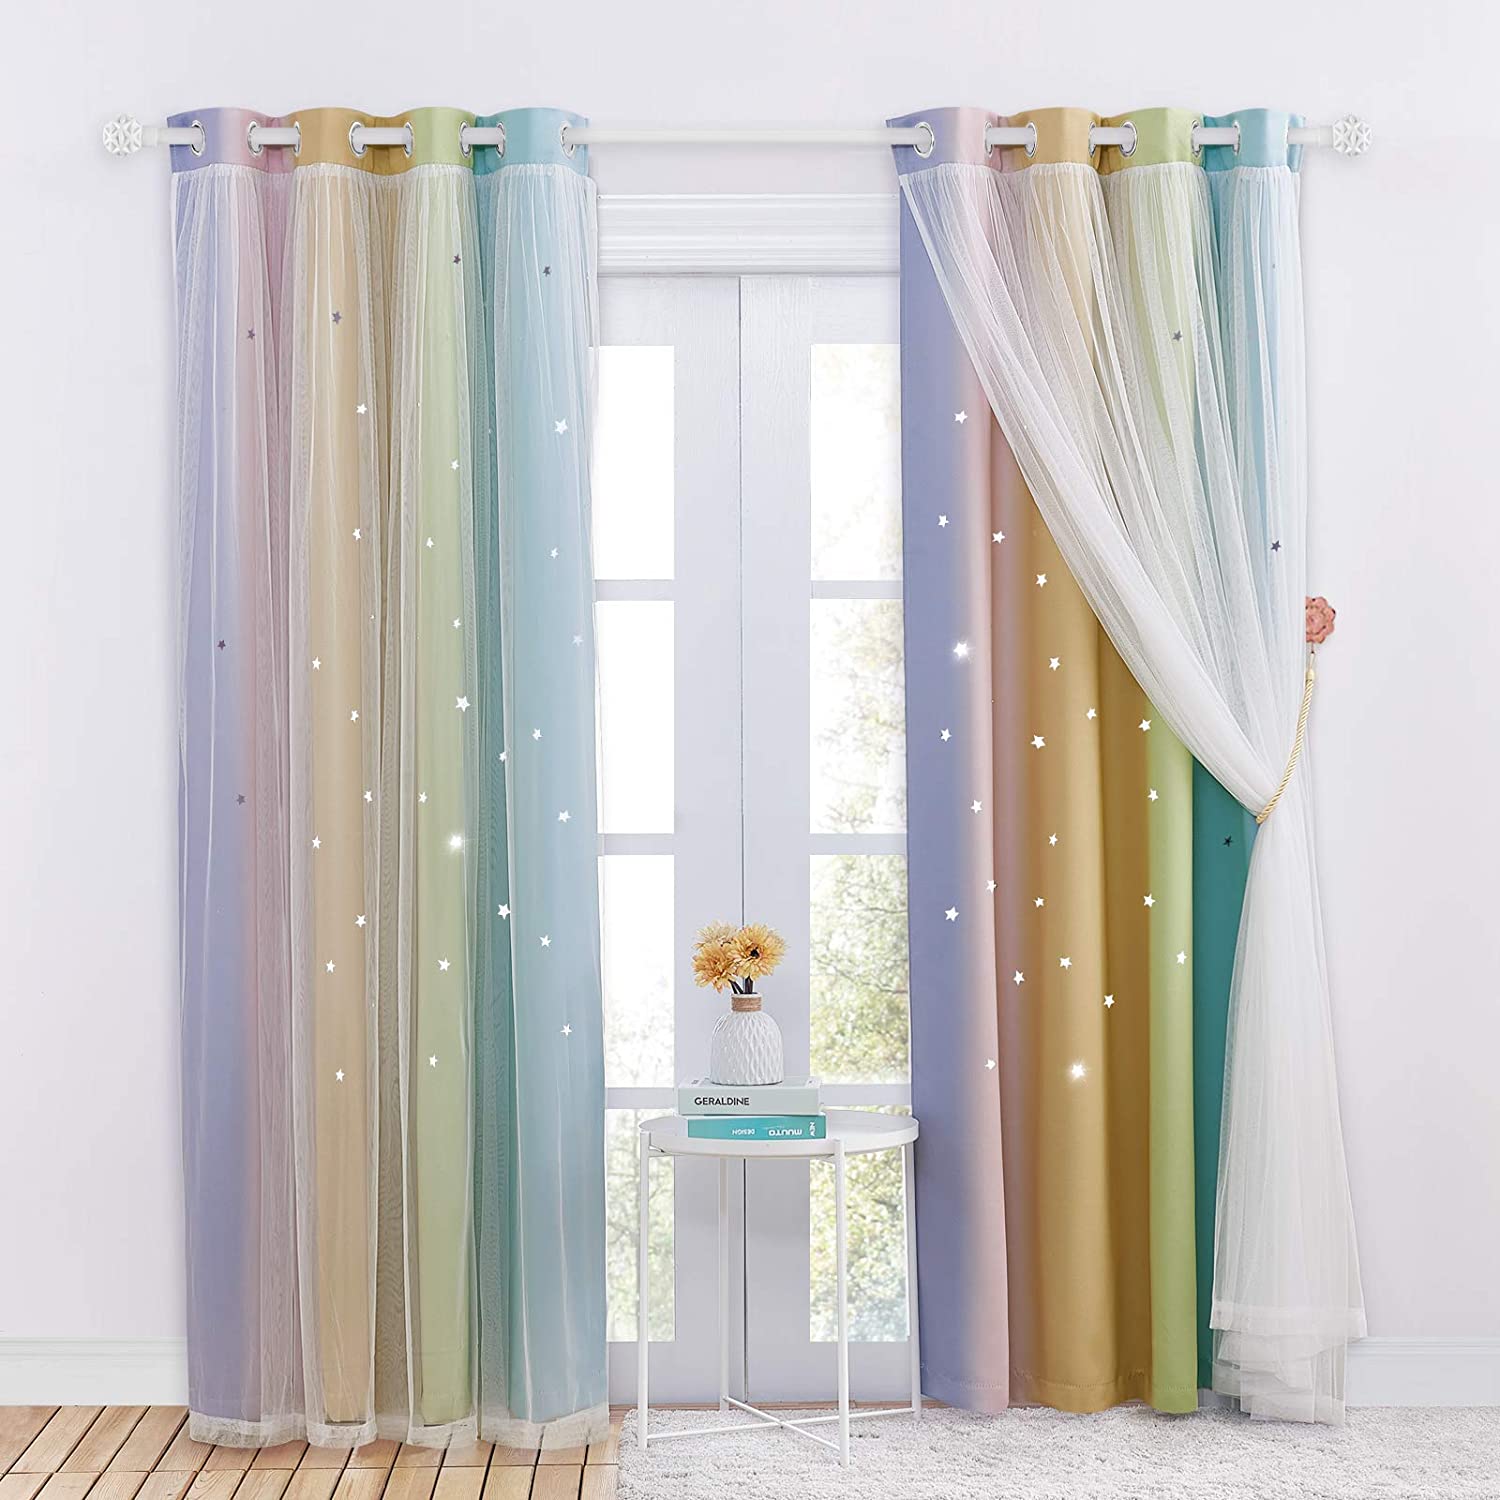 Star Cut Out Blackout Curtains With Sheer Curtain Overlay 1 Panel KGORGE Store